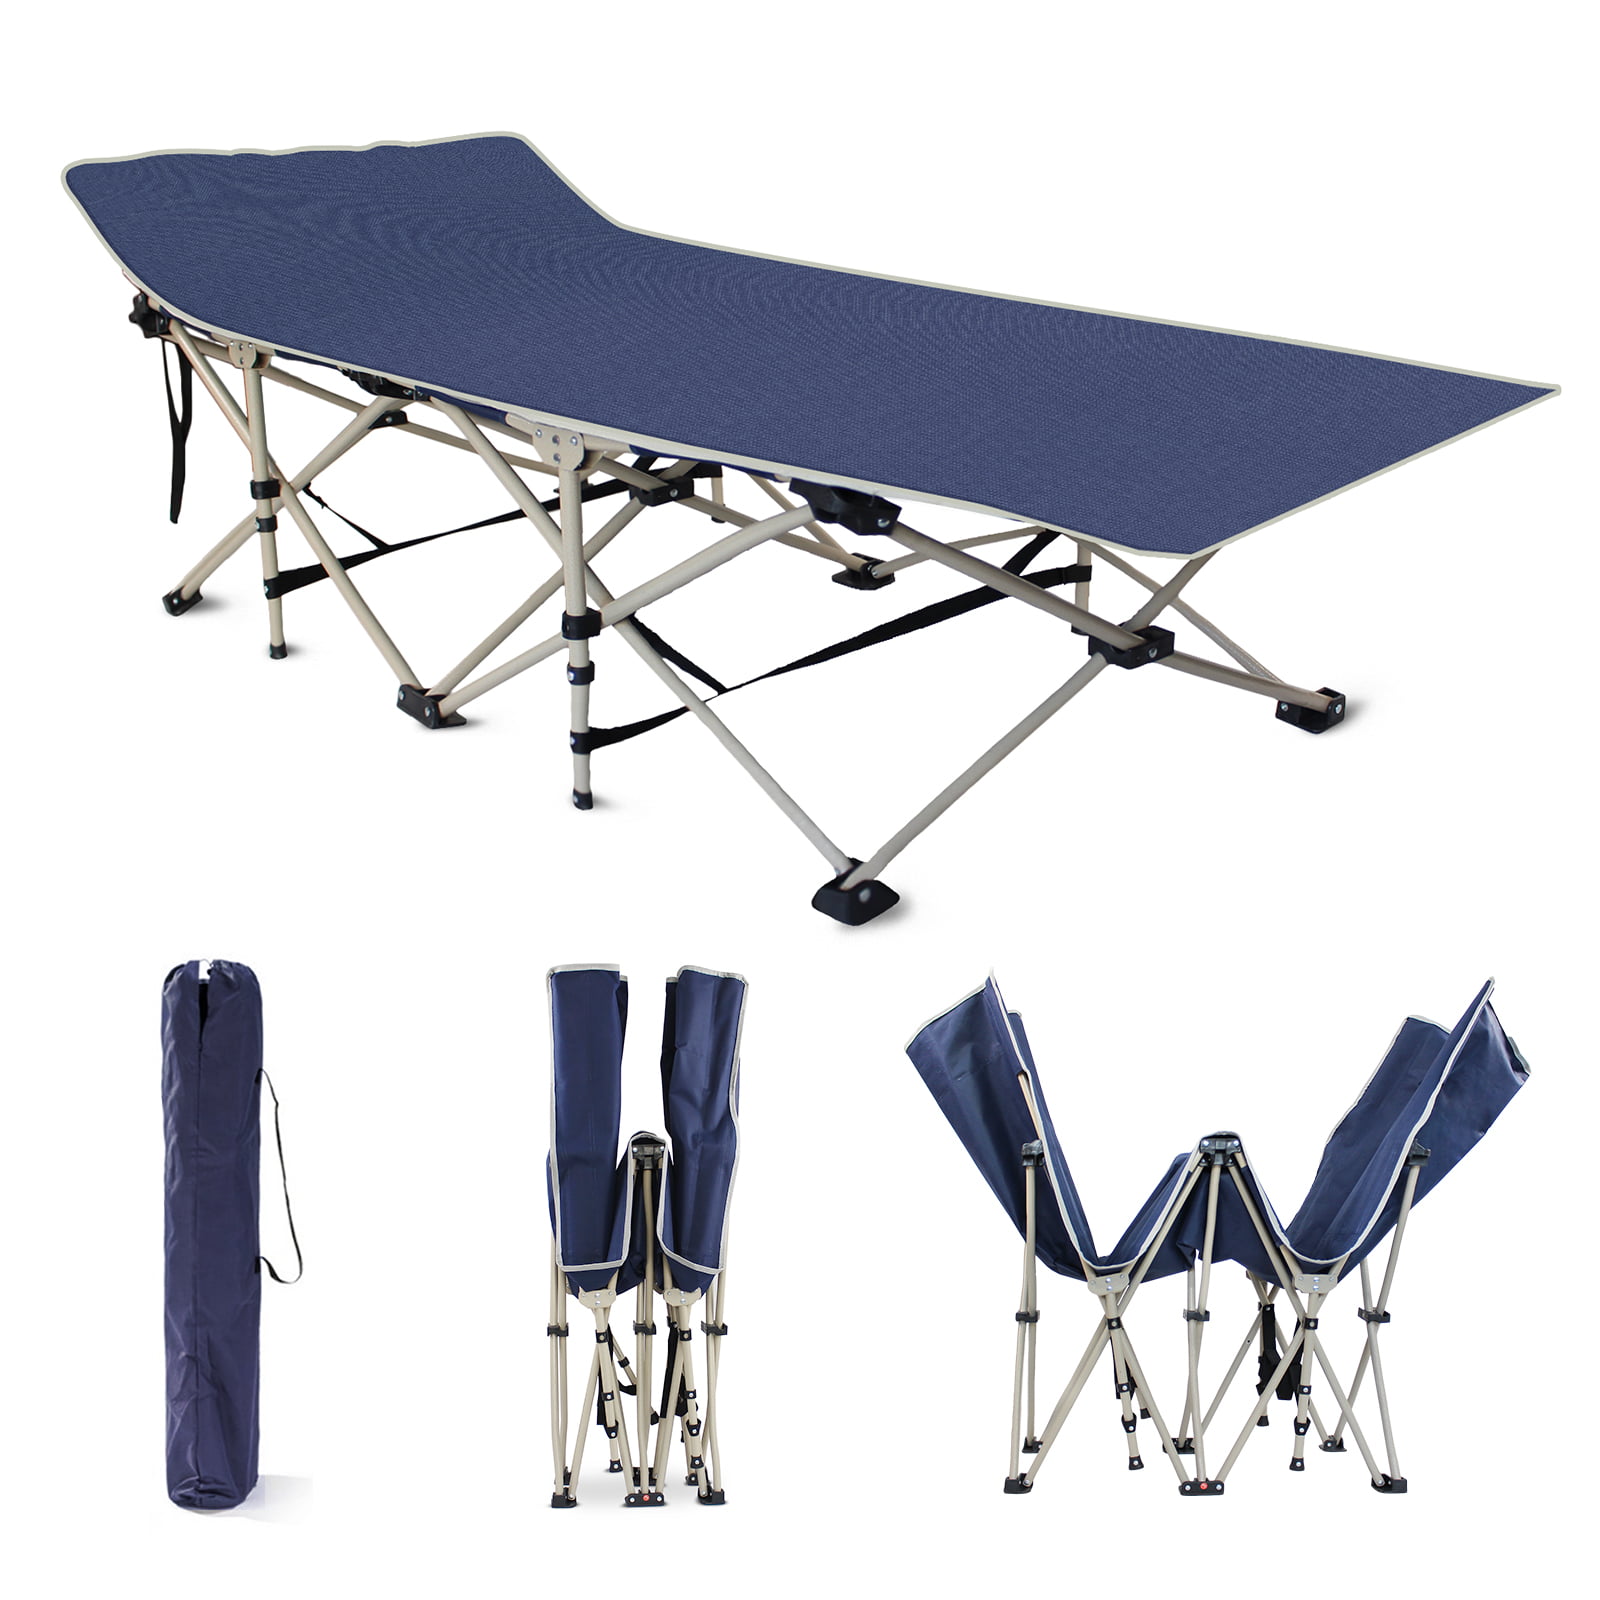 Portable Folding Bed Stable Camping Cot Outdoor Travel Sleeping w/ Side Pocket 